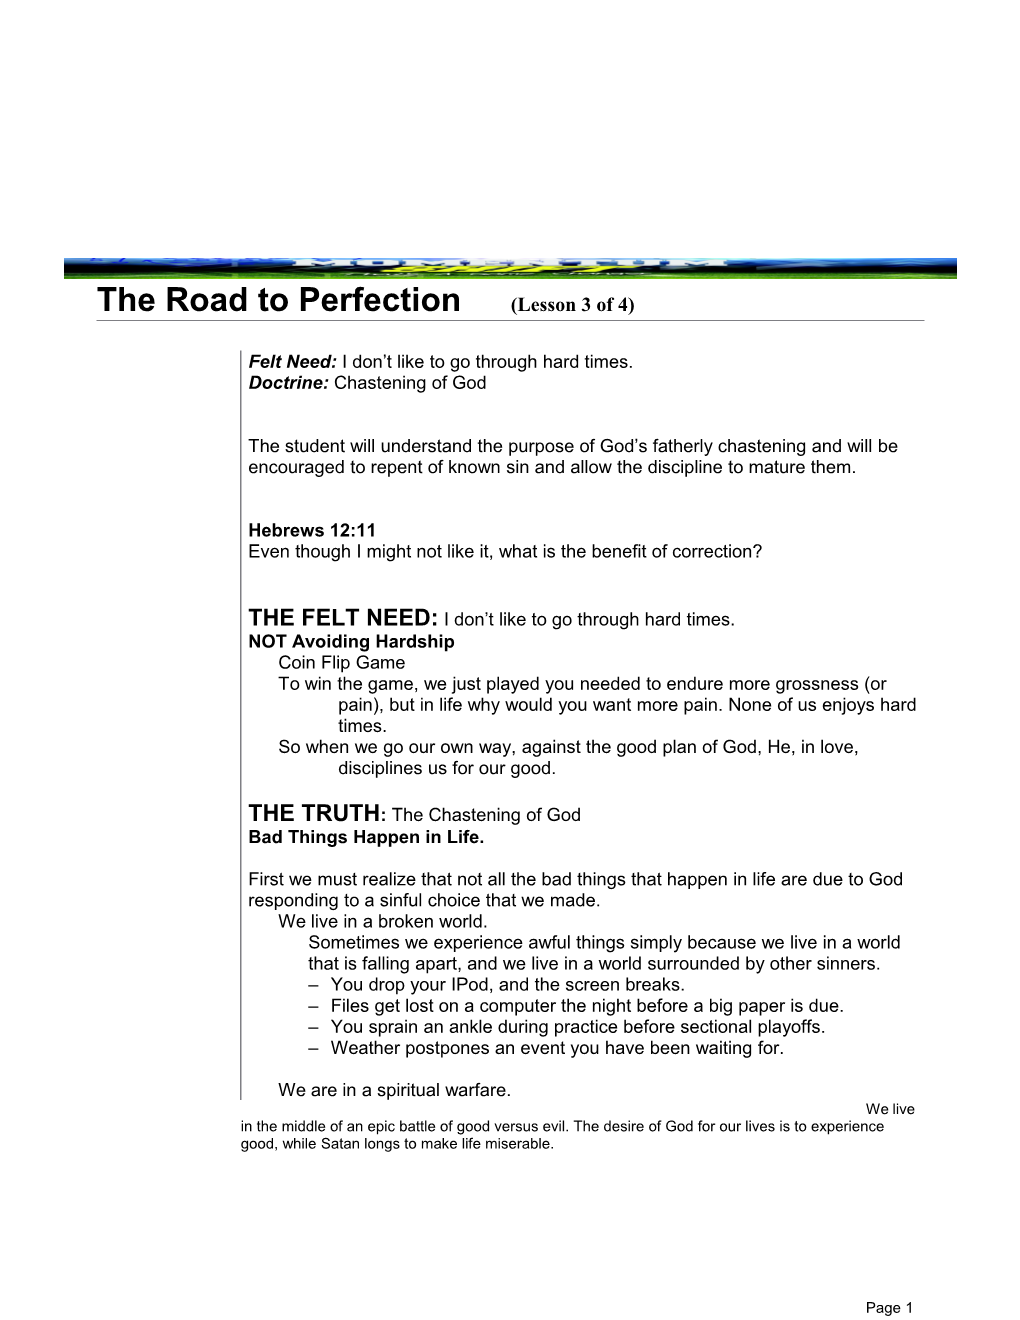 The Road to Perfection (Lesson 3 of 4)